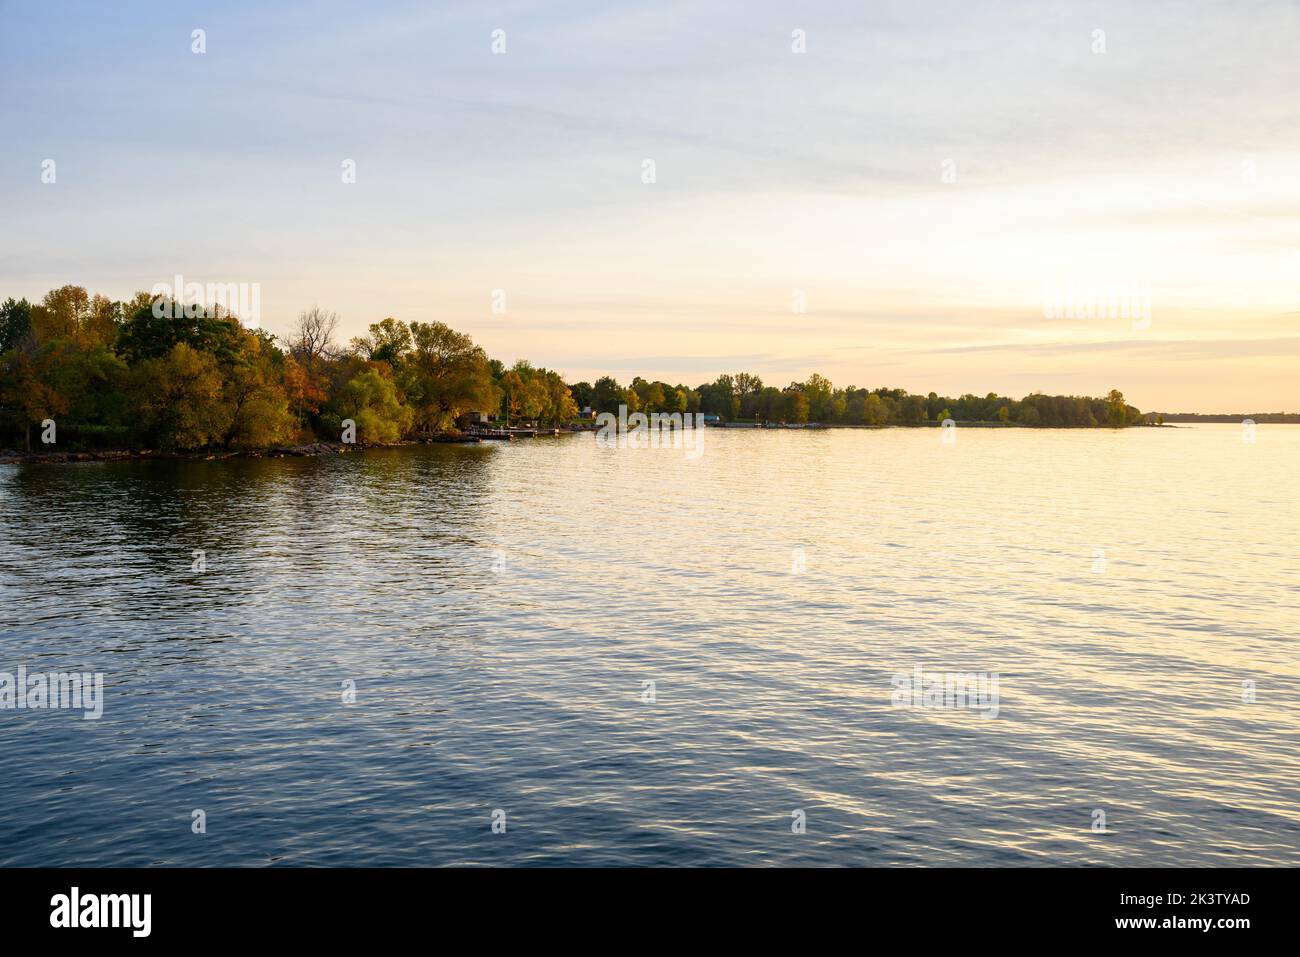 Wooded shores of a lake at sunet. Tranquil scene. Stock Photo